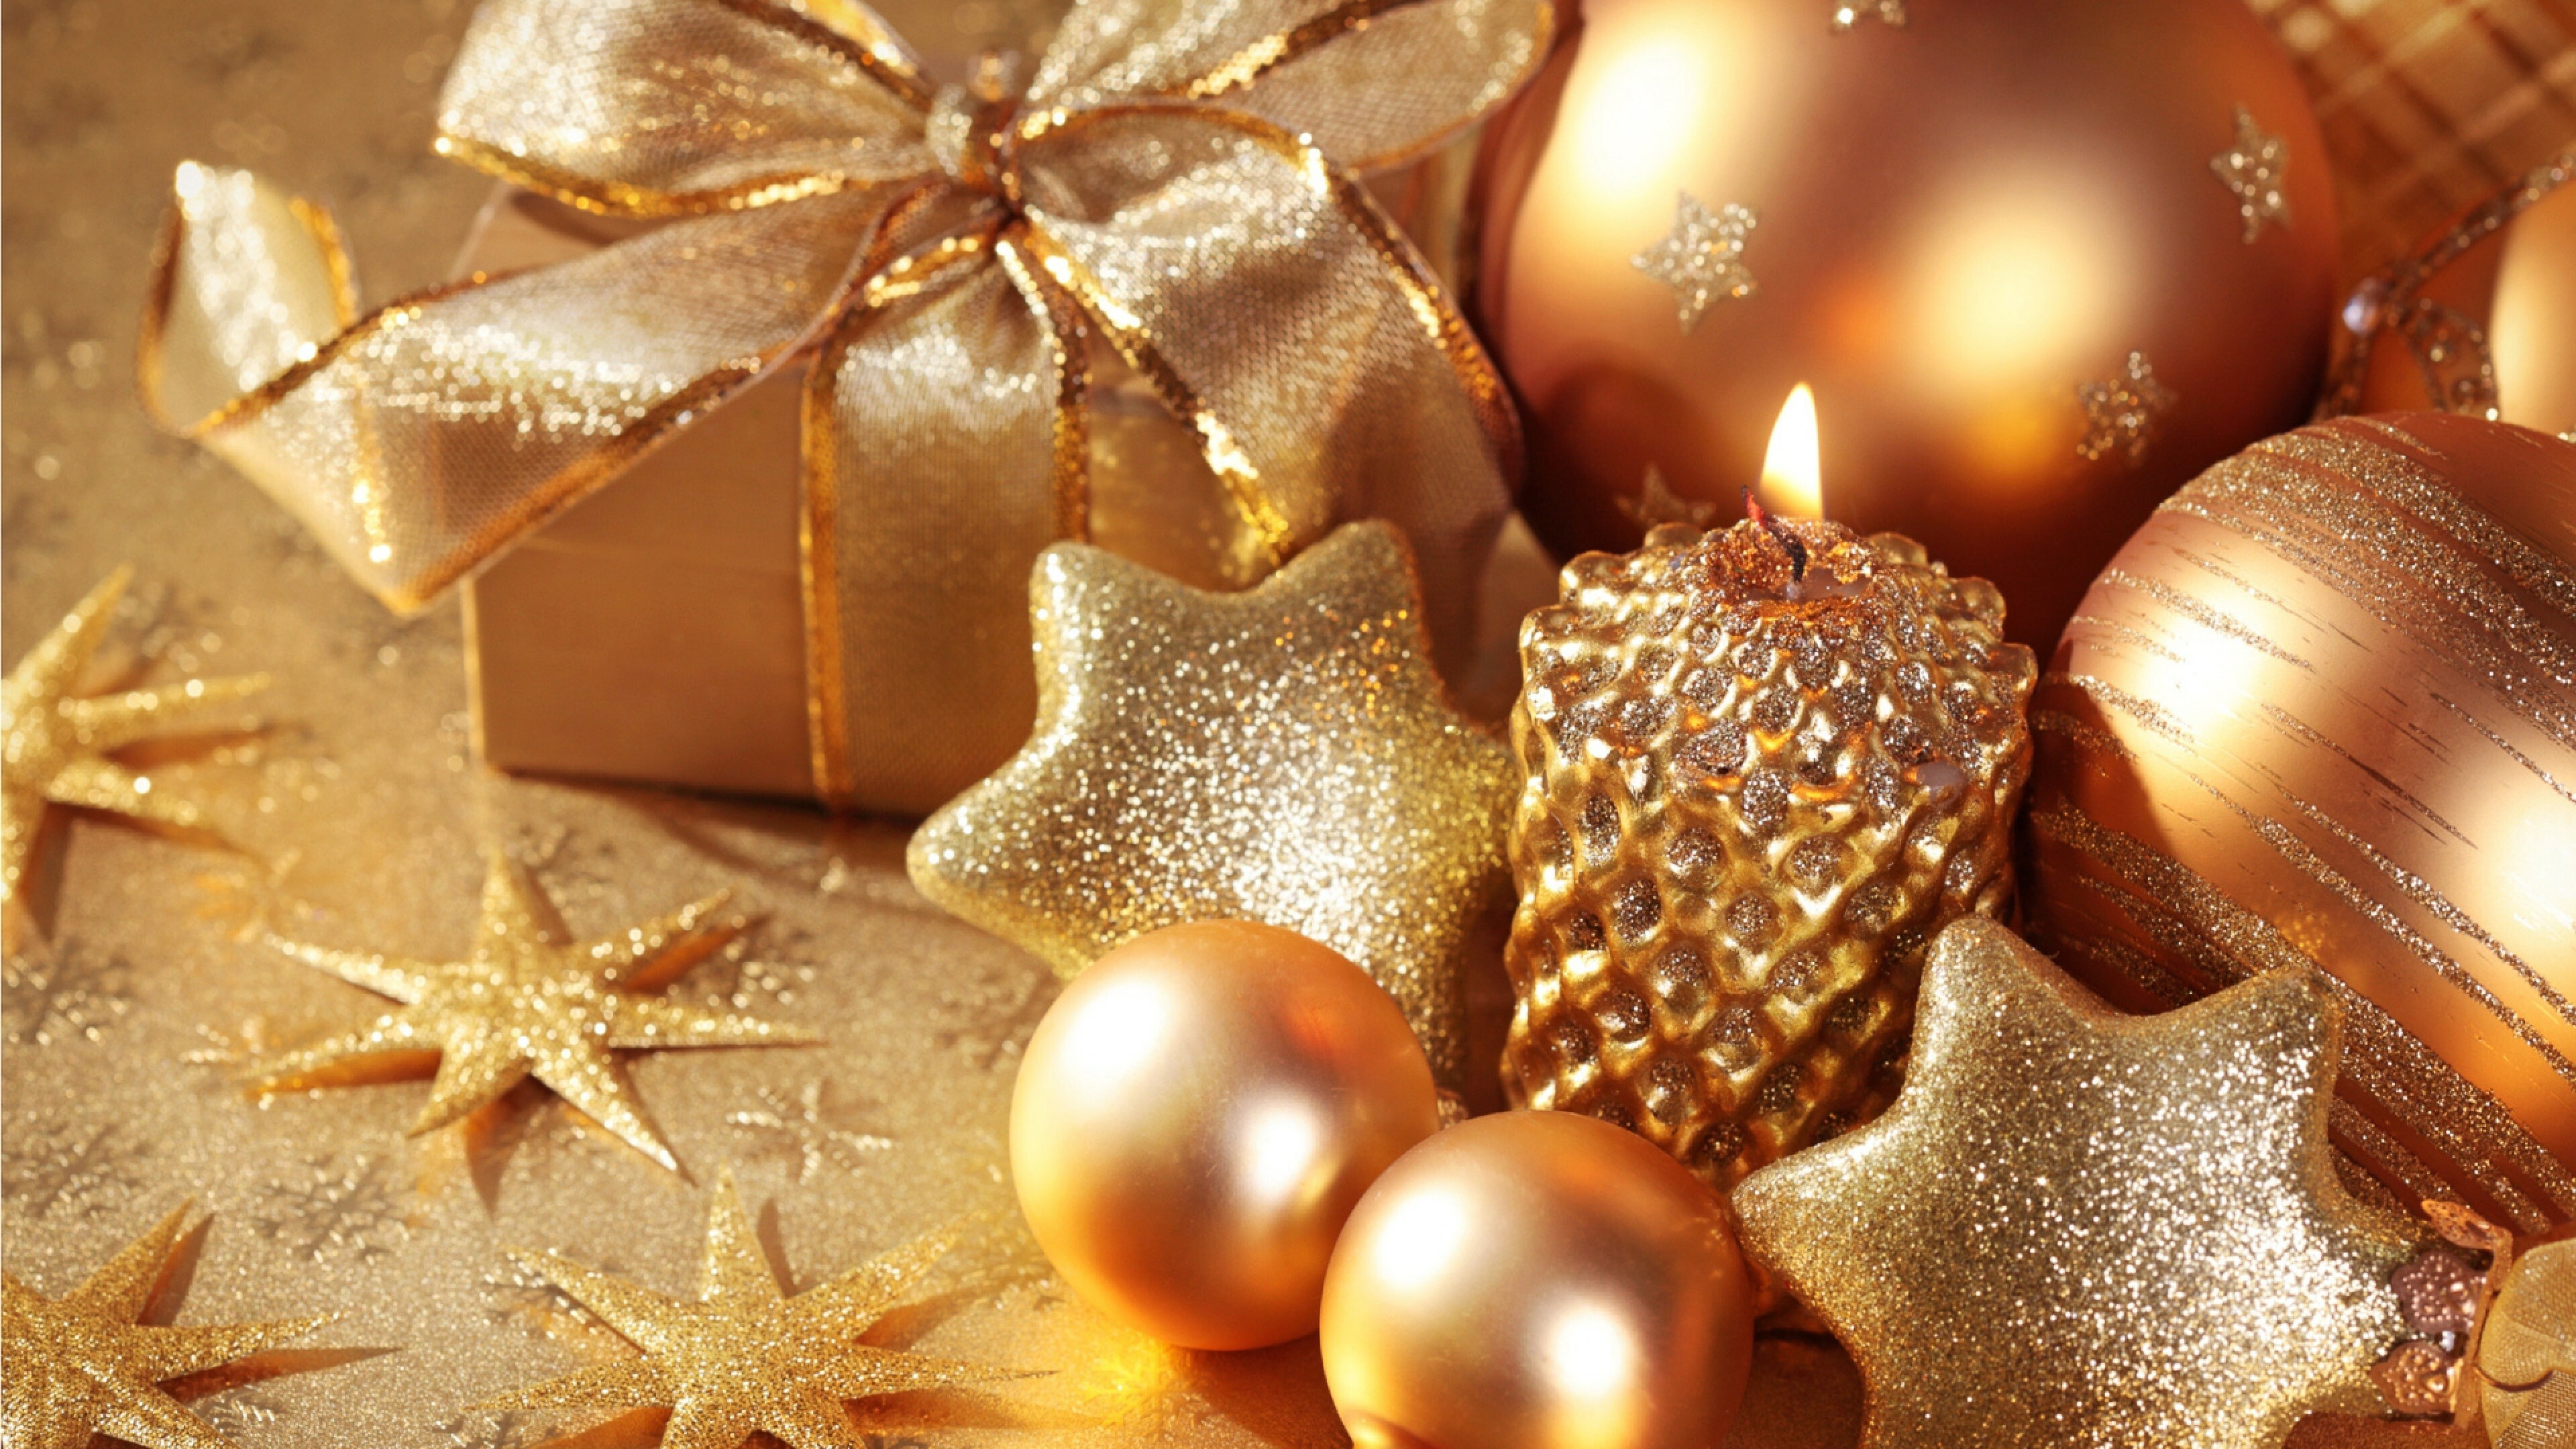 Decorations: Christmas, New Year, Stars, Candle, Gifts, Holidays. 3840x2160 4K Wallpaper.